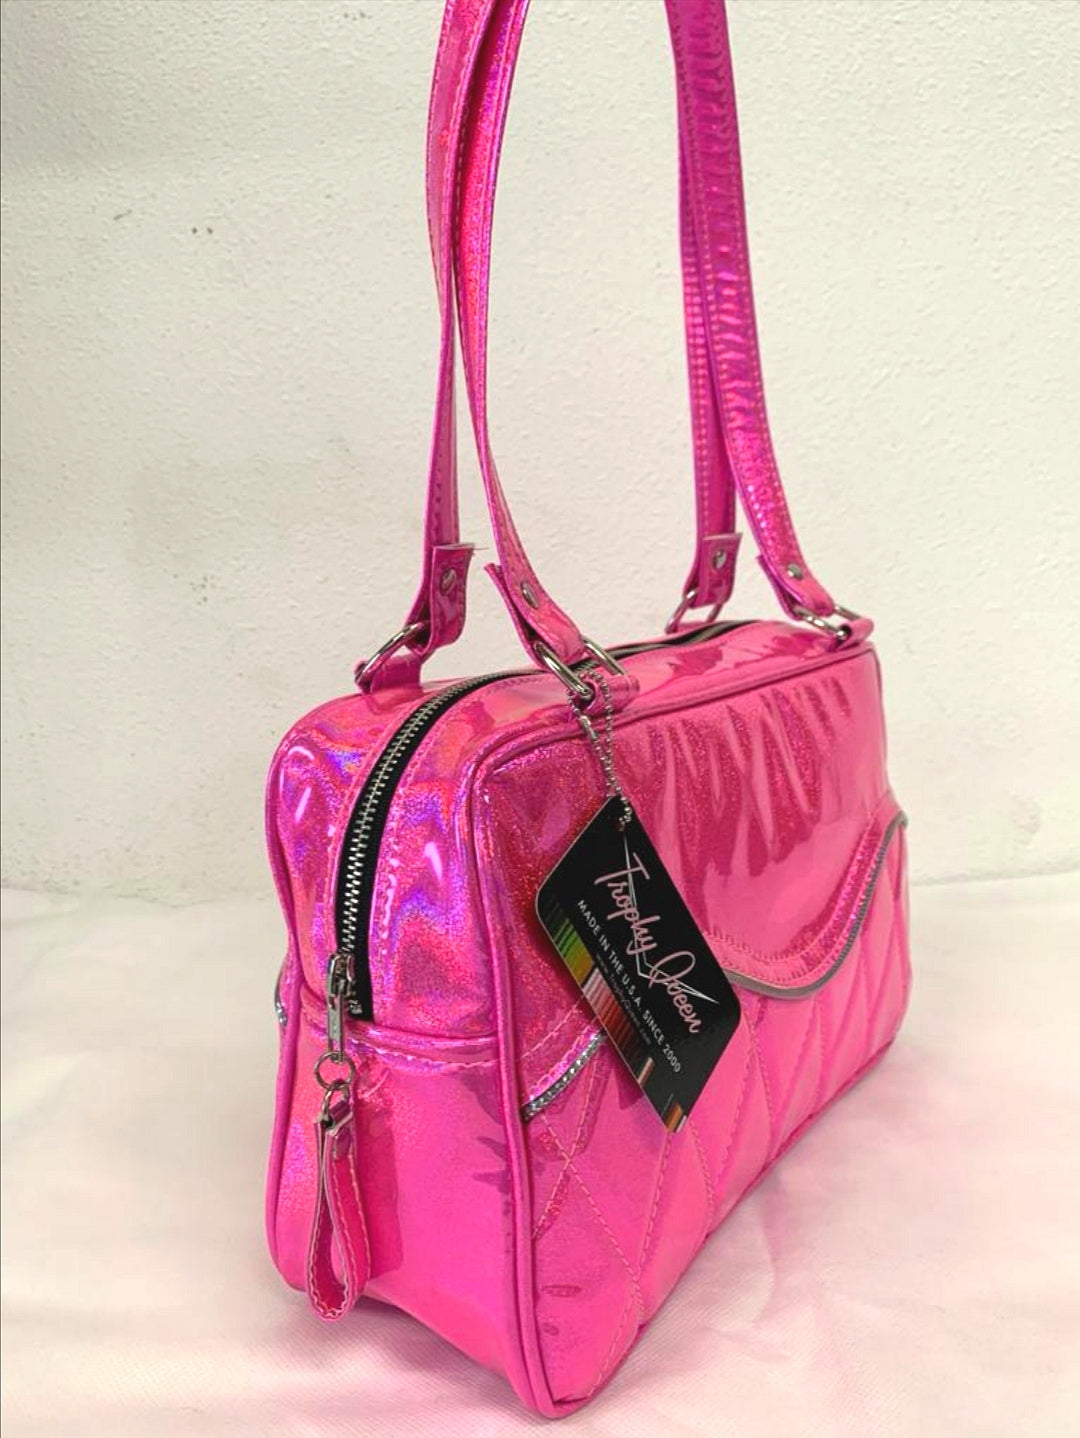 Limited Edition Color the Diamond Pleat Tuck and Roll Tote in Cosmic Pink Glitter Vinyl and plush leopard lining is handcrafted in California with nickel hardware and 25” straps plus it comes with replacement straps. Inside open divided pocket and inside zipper pocket with serial number hidden inside. Nickel feet, vinyl zipper pull, and signature Trophy Queen Label included. The perfect size bag for any trip!